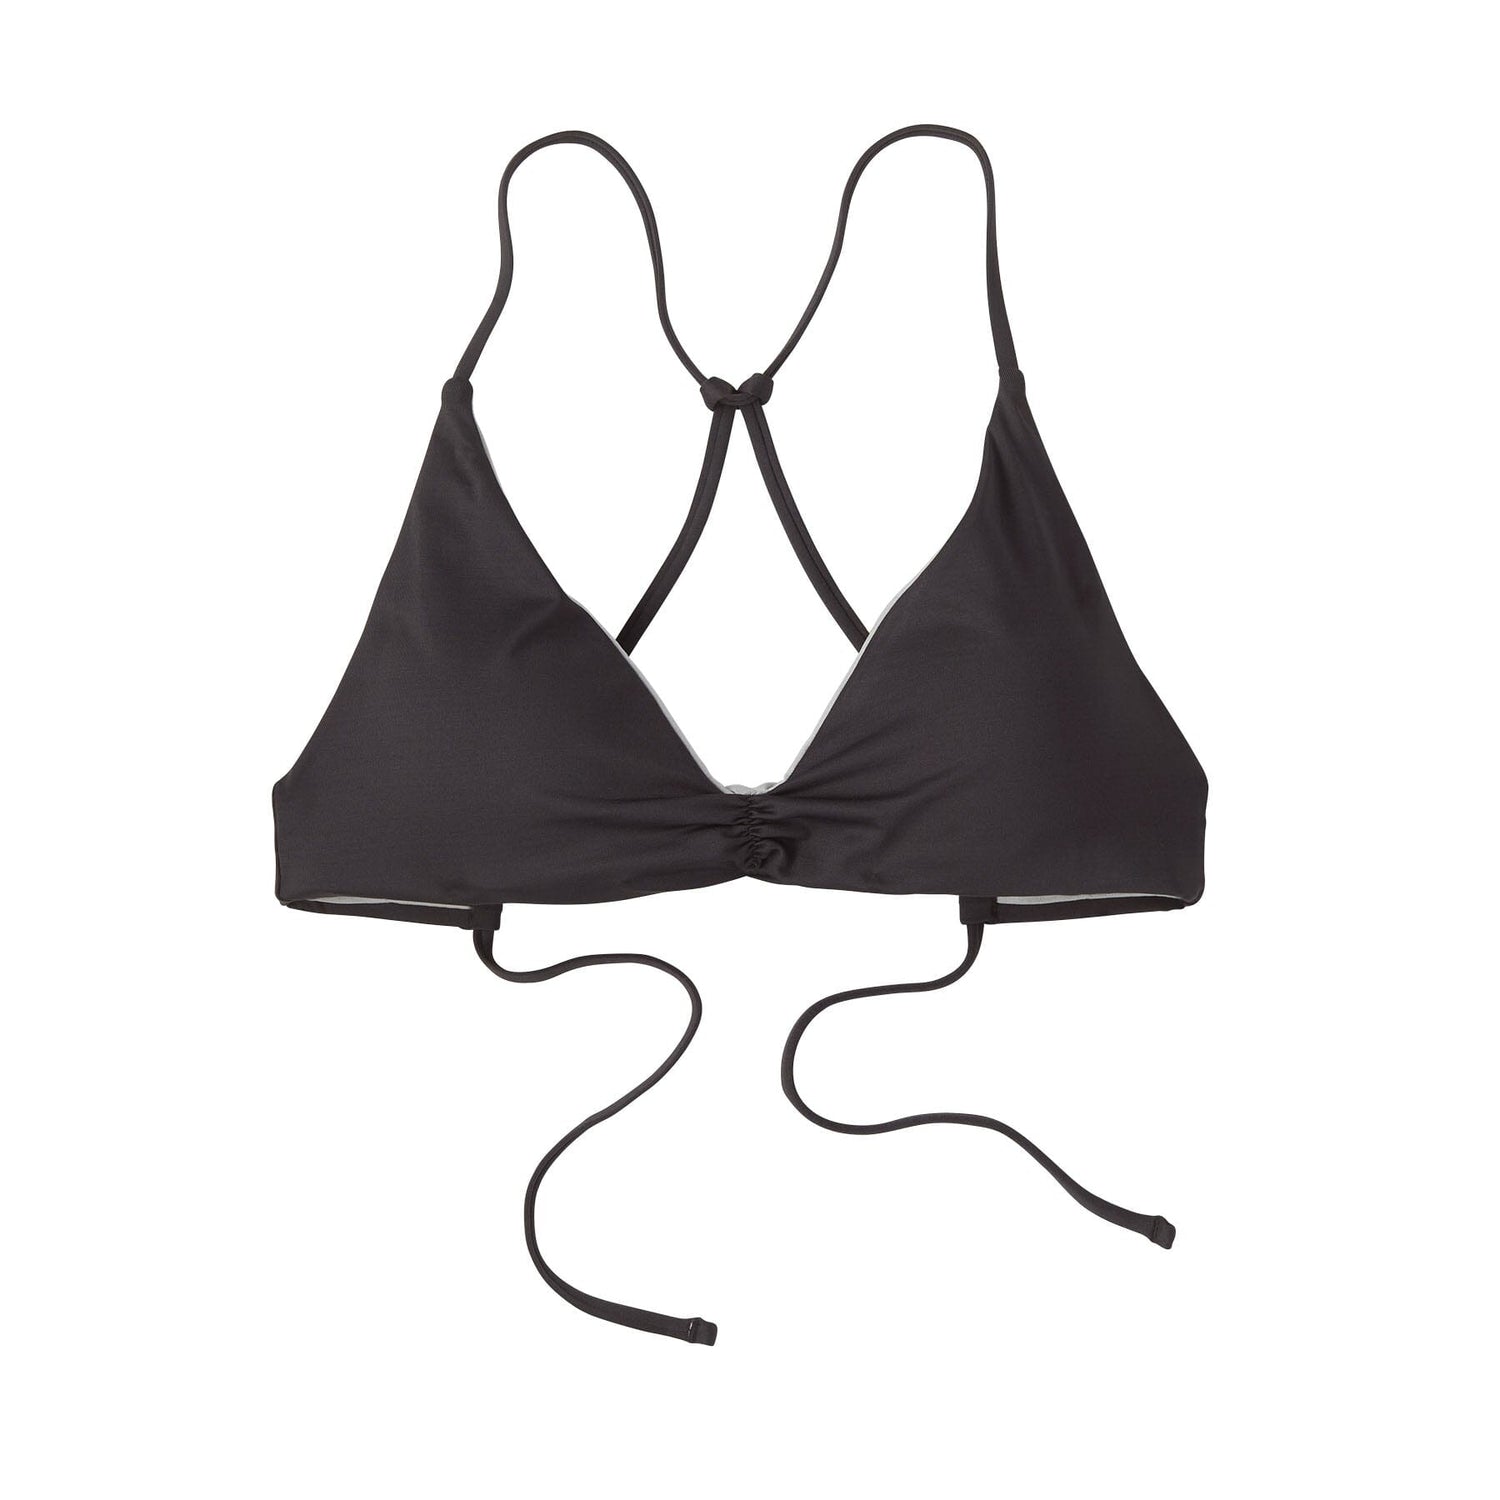 Patagonia - W's Nanogrip Sunny Tide Bikini Top - Recycled Nylon/Recycled Polyester - Weekendbee - sustainable sportswear